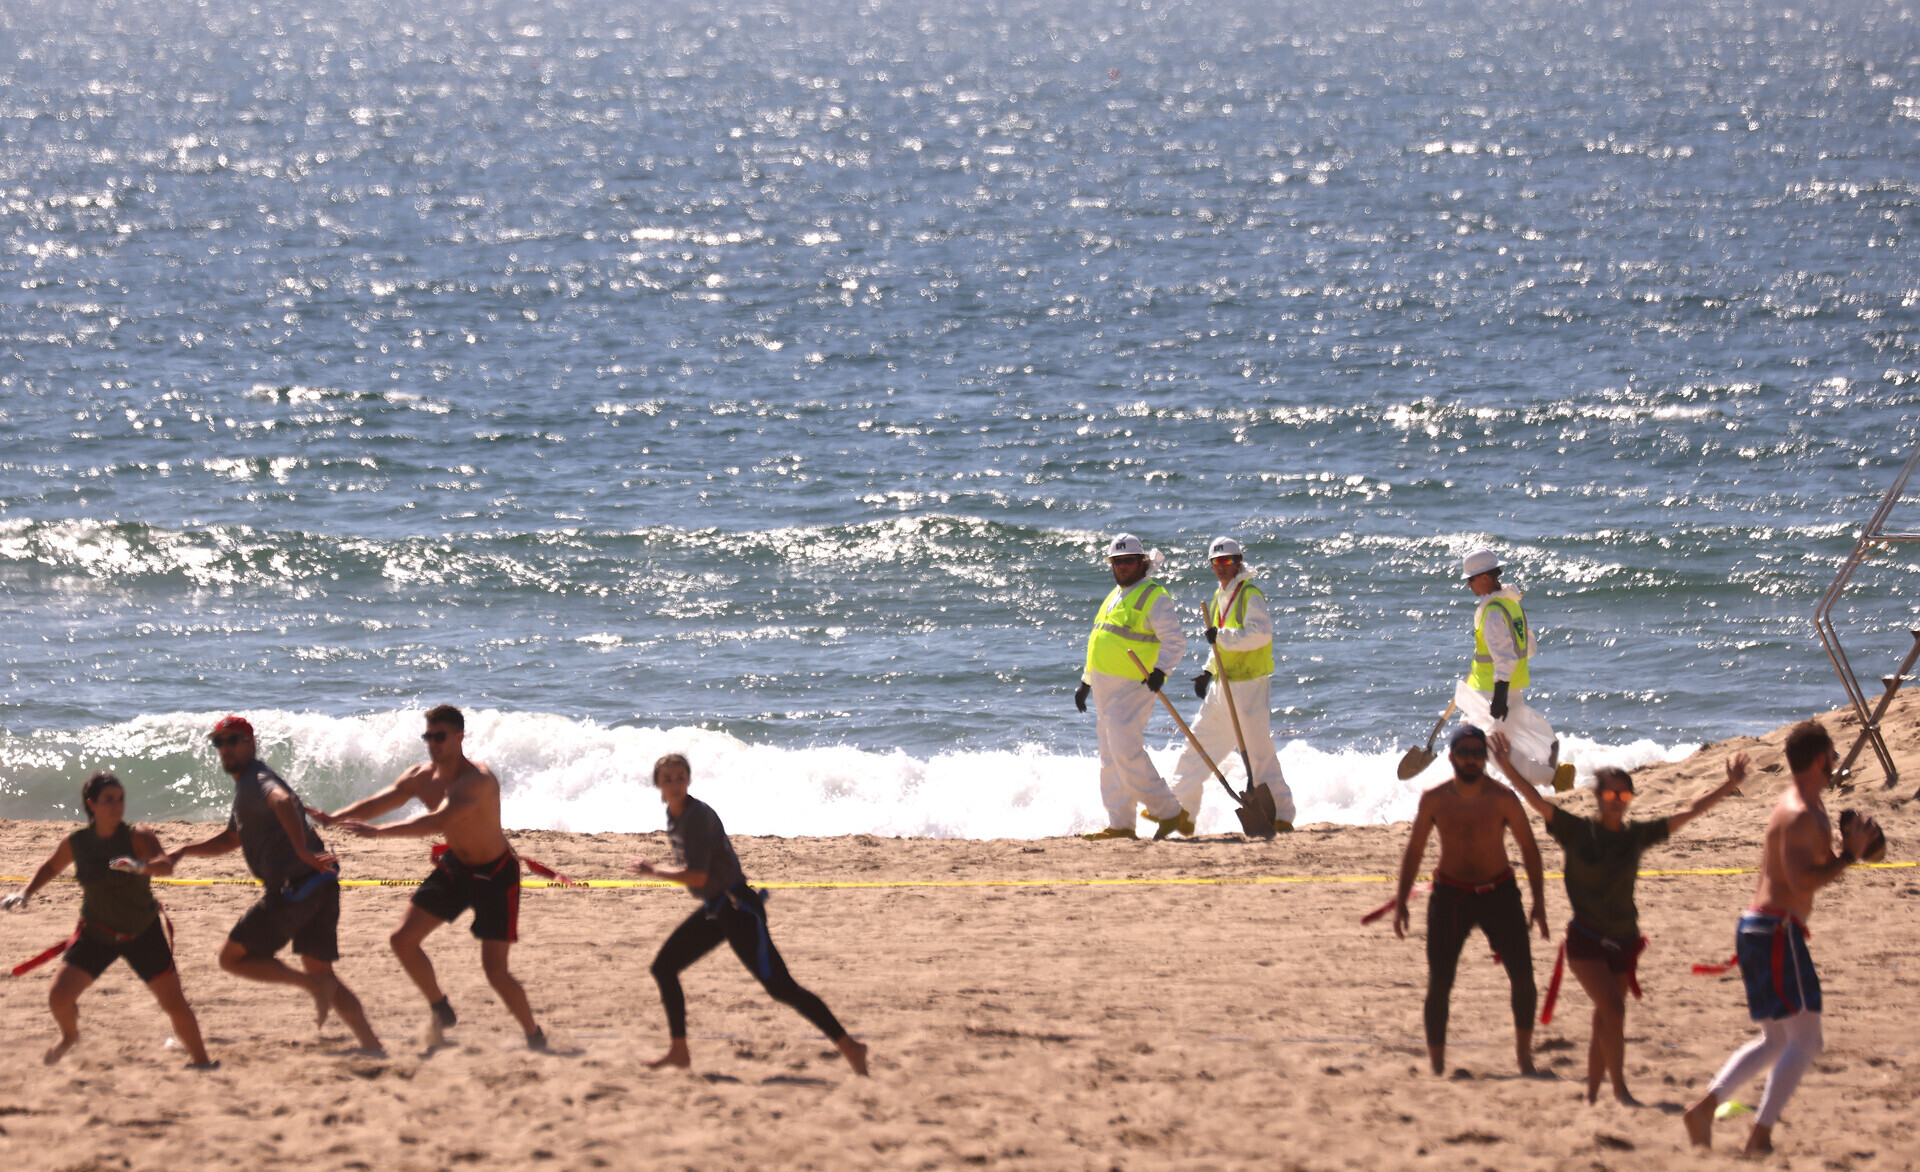 On a sunny beach along the sunlit ocean, three people dressed all in white with neon yellow jackets and white hard hats carry tools beyond a group of people wearing shorts, one holding a football.